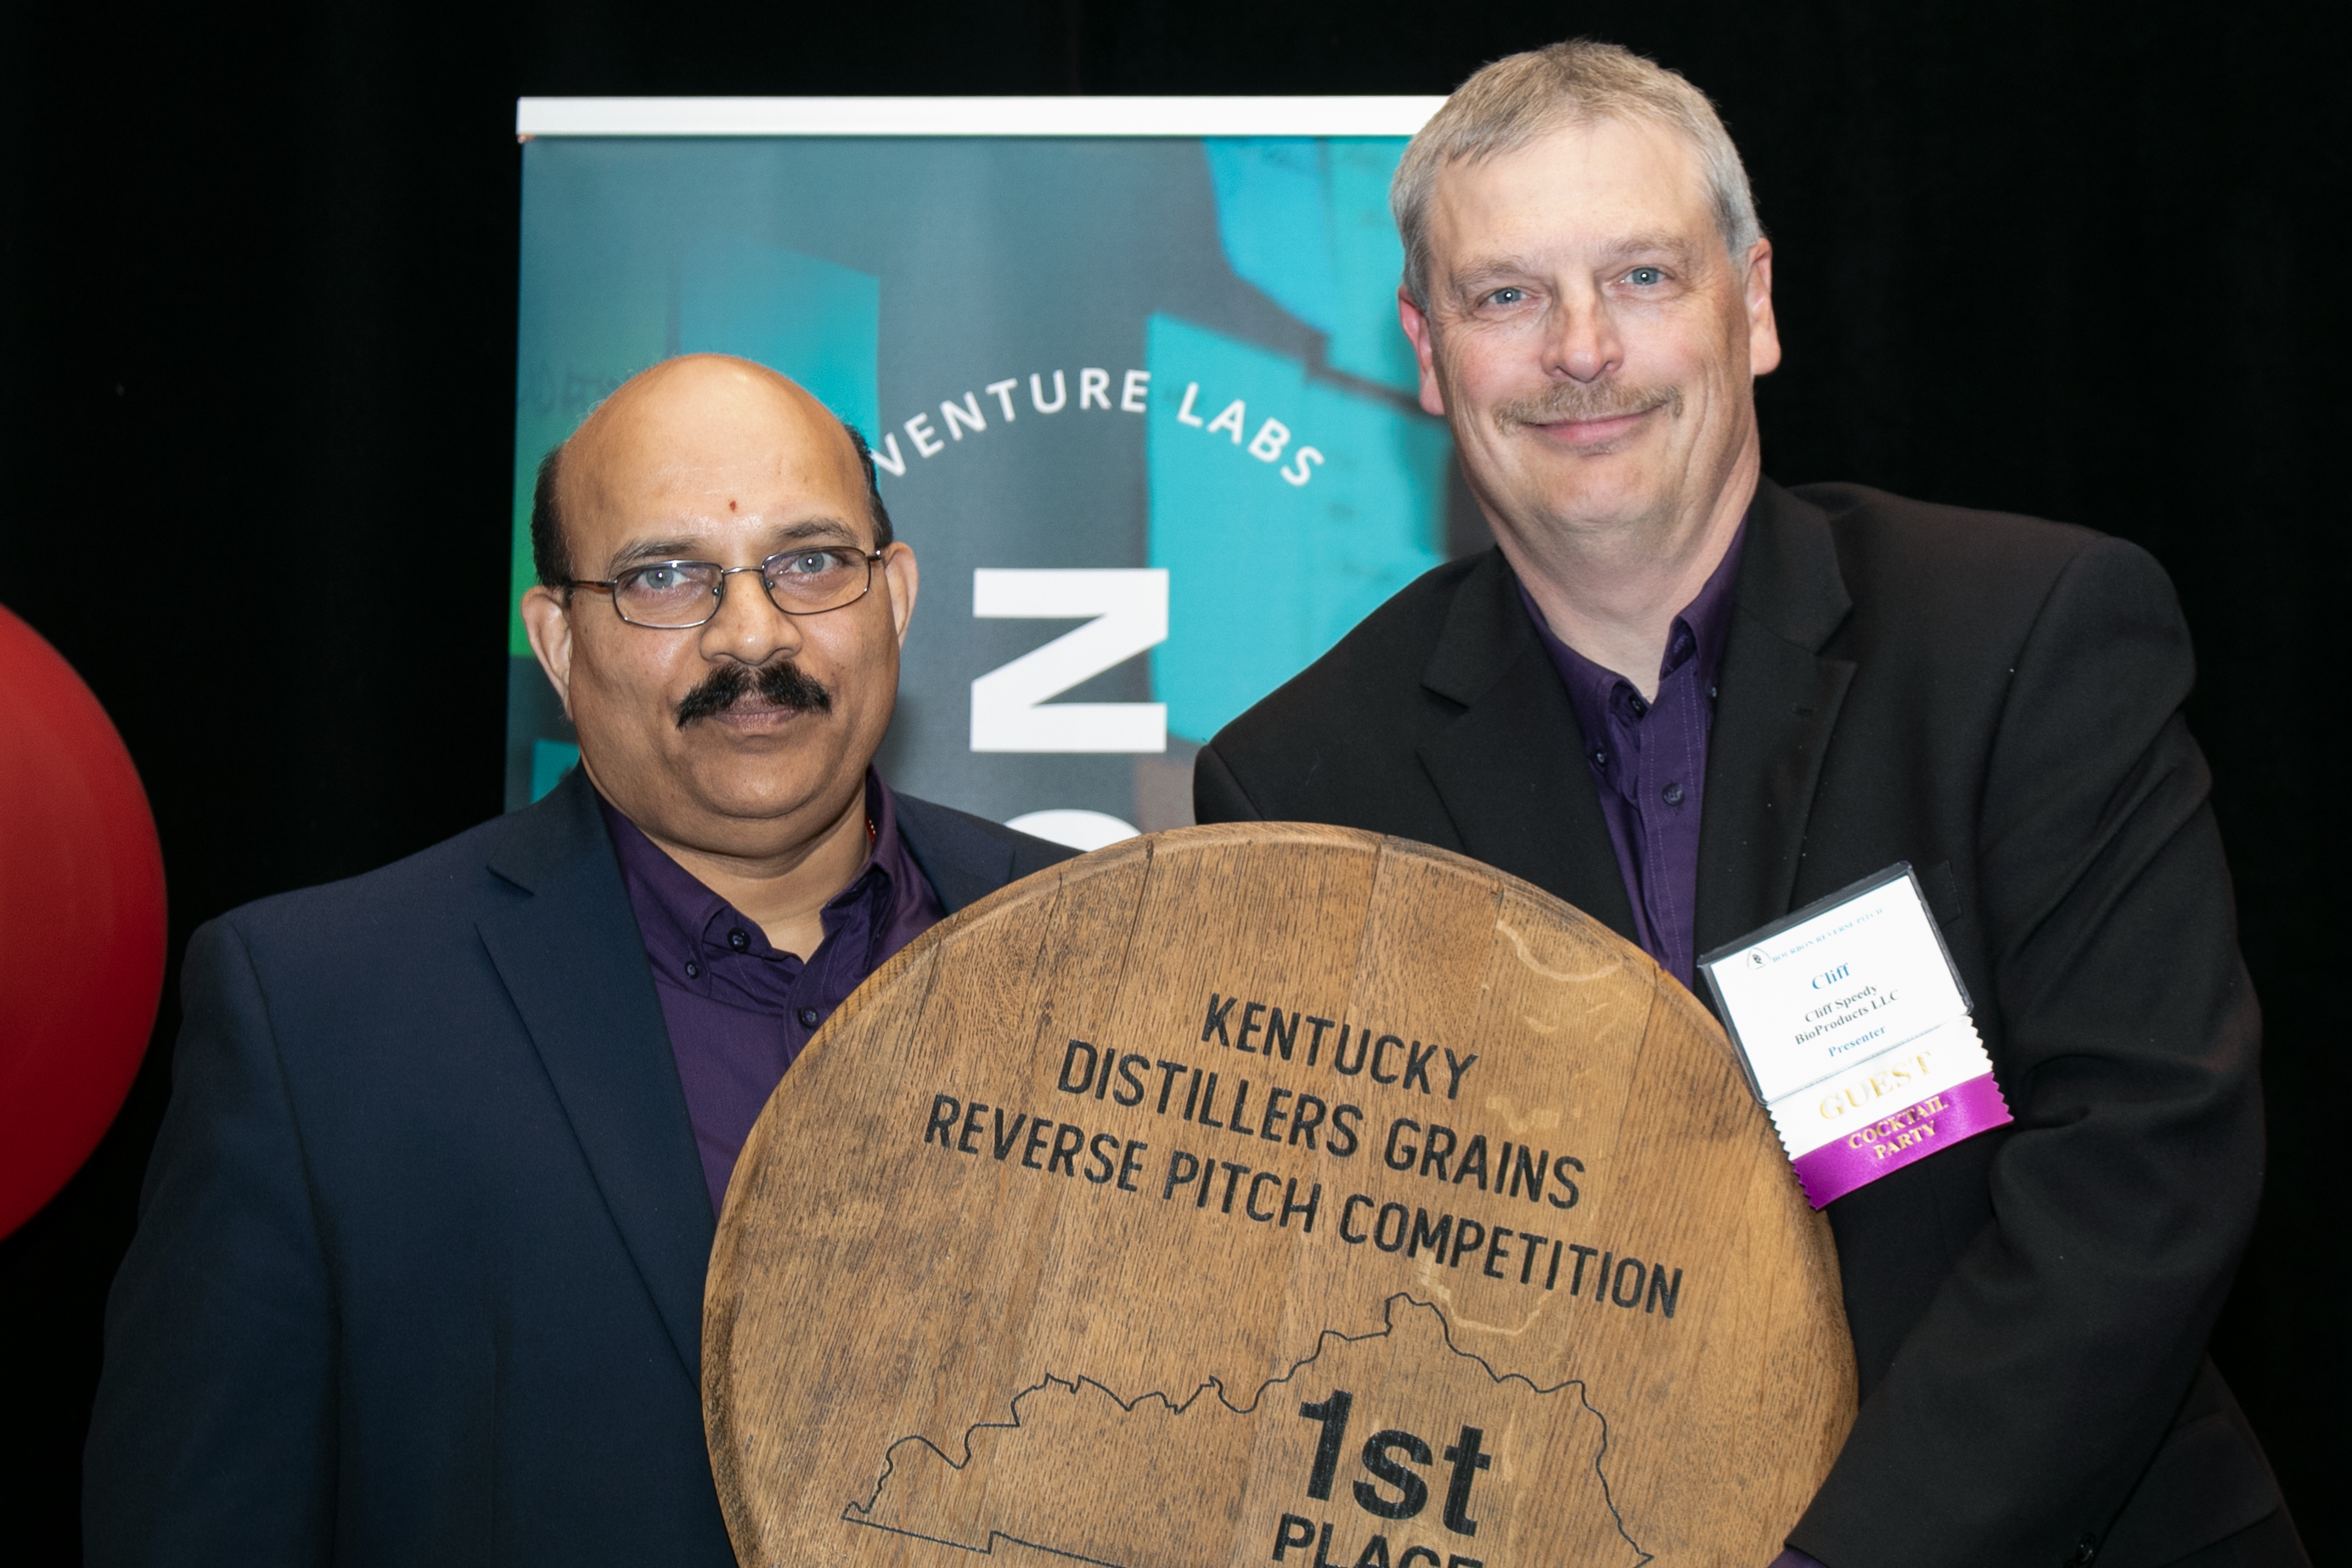 BioProducts, a UofL startup based on research-born technology for reusing spent distillers' grain, has won a bourbon sustainability pitch competition.